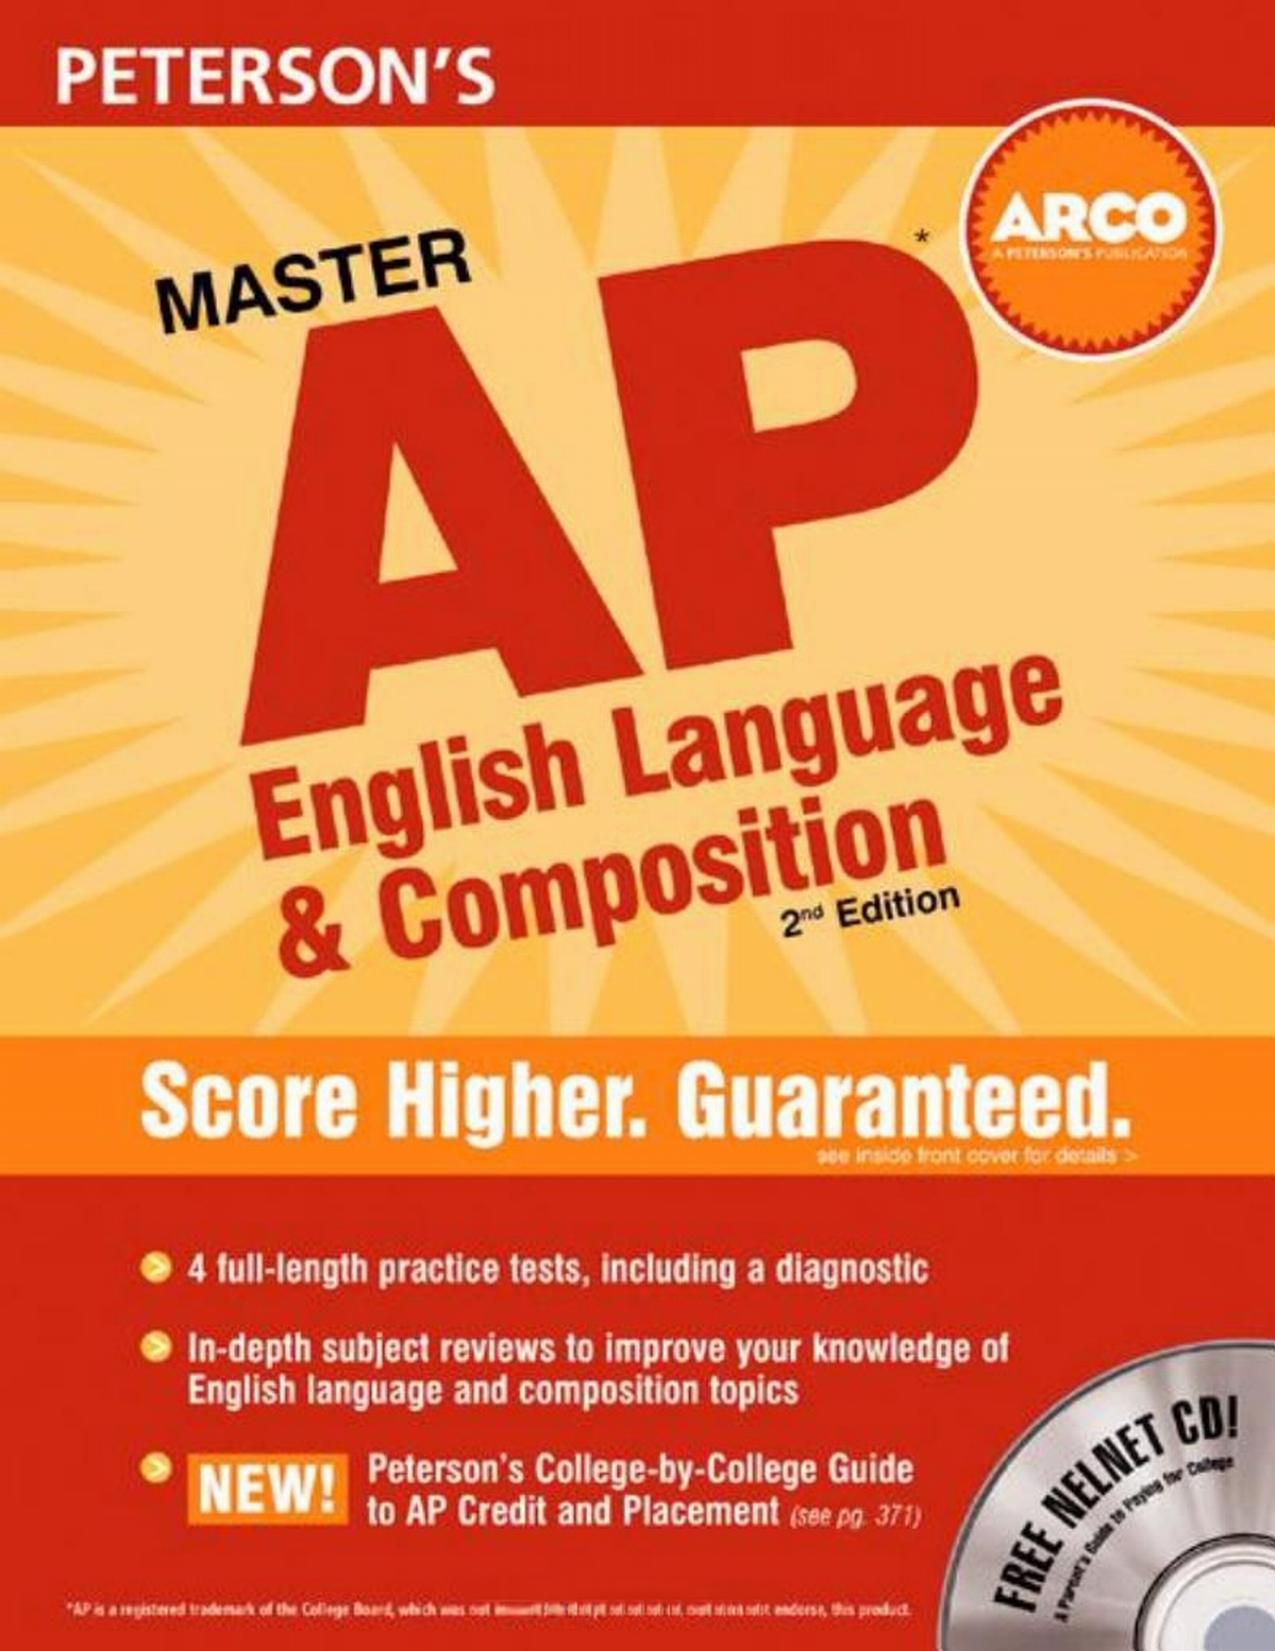 Peterson’s MASTER AP ENGLISH LANGUAGE & COMPOSITION, 2nd Edition